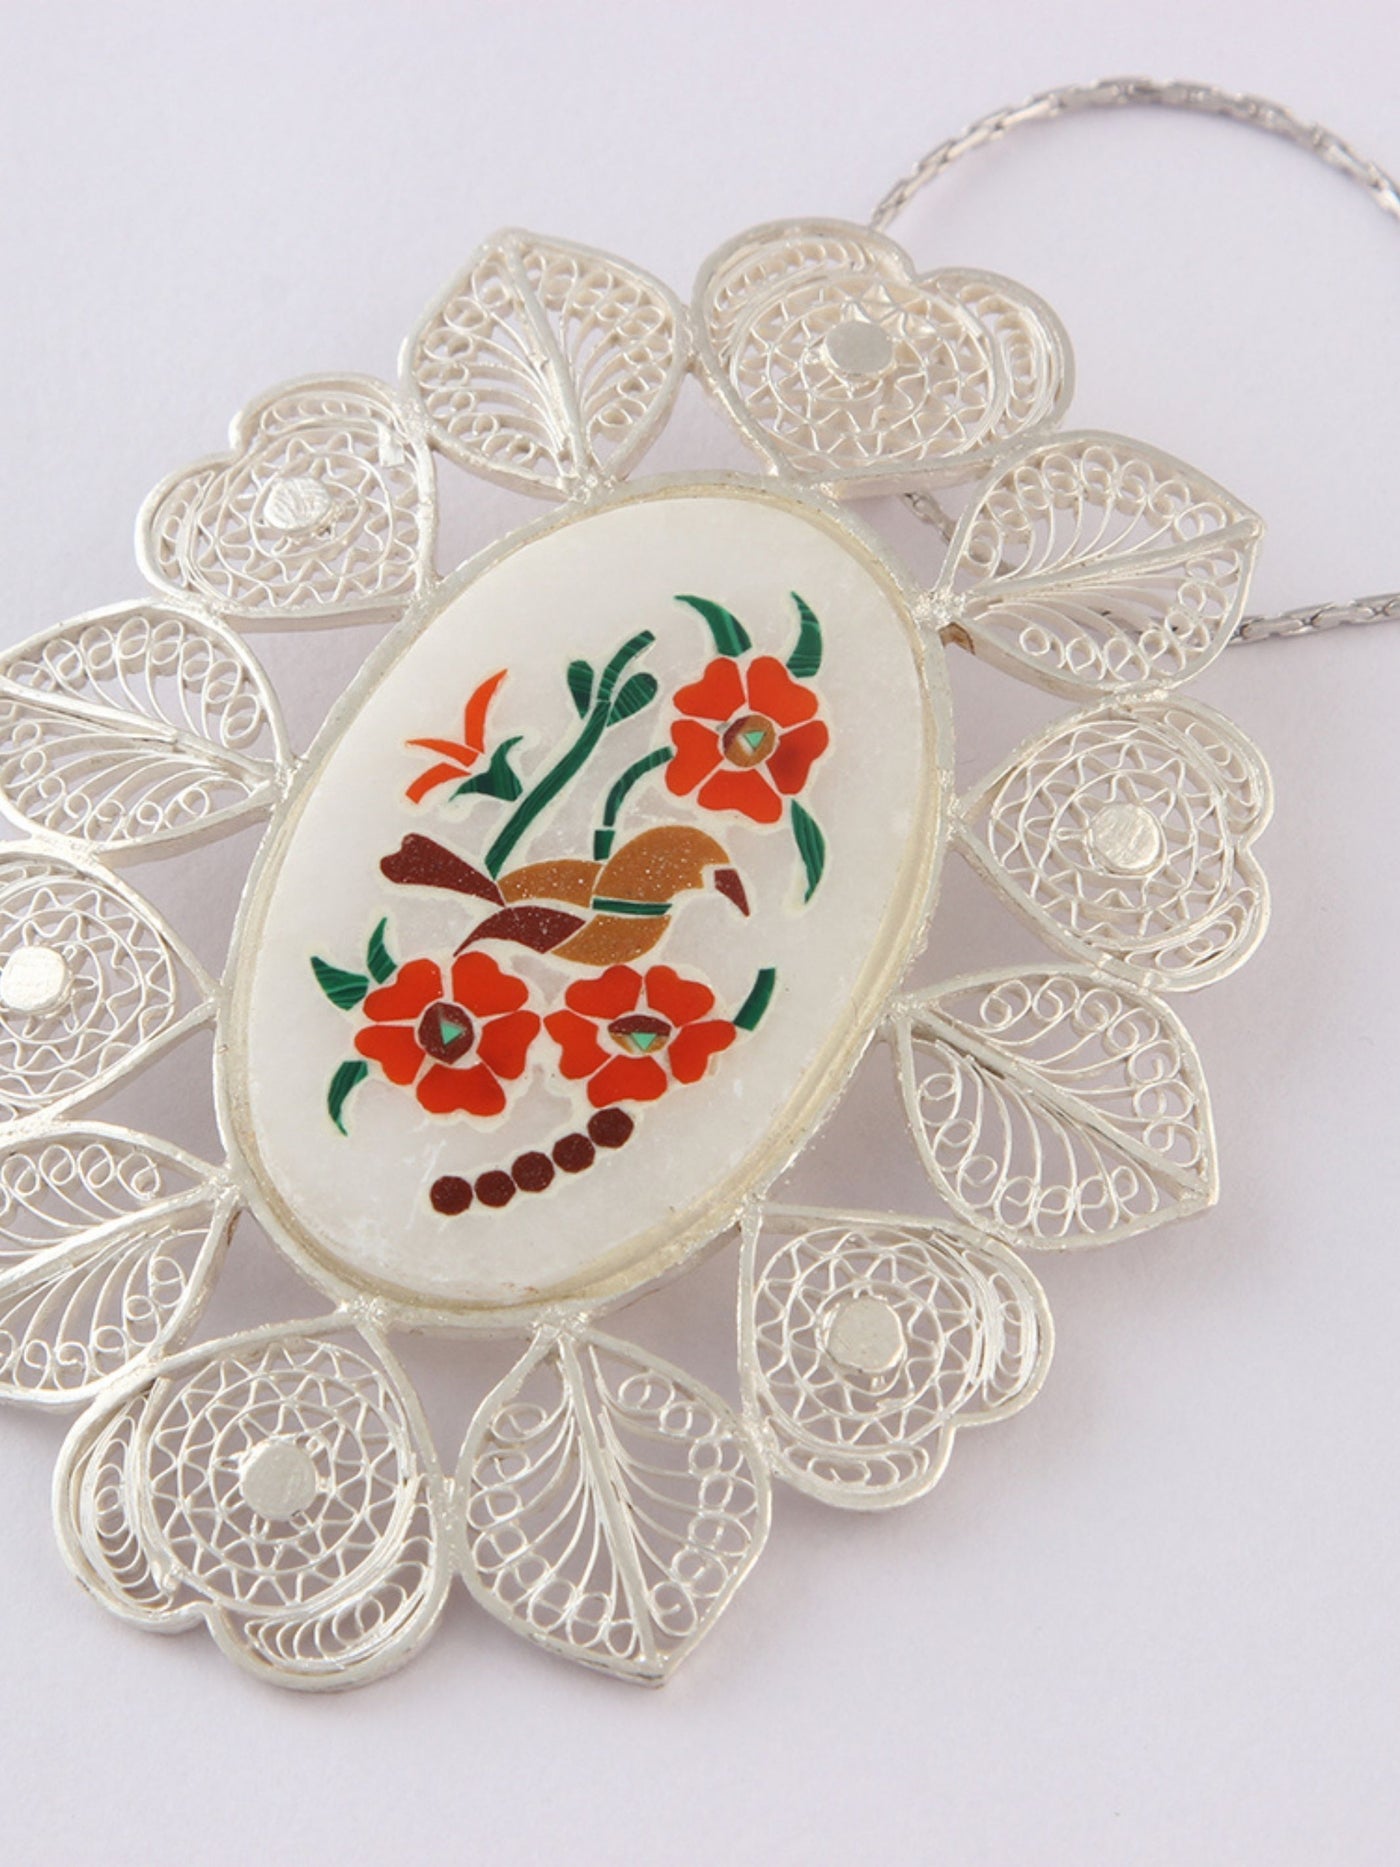 Multicolored Filigree Silver Pendant With Marble Inlay - View 3